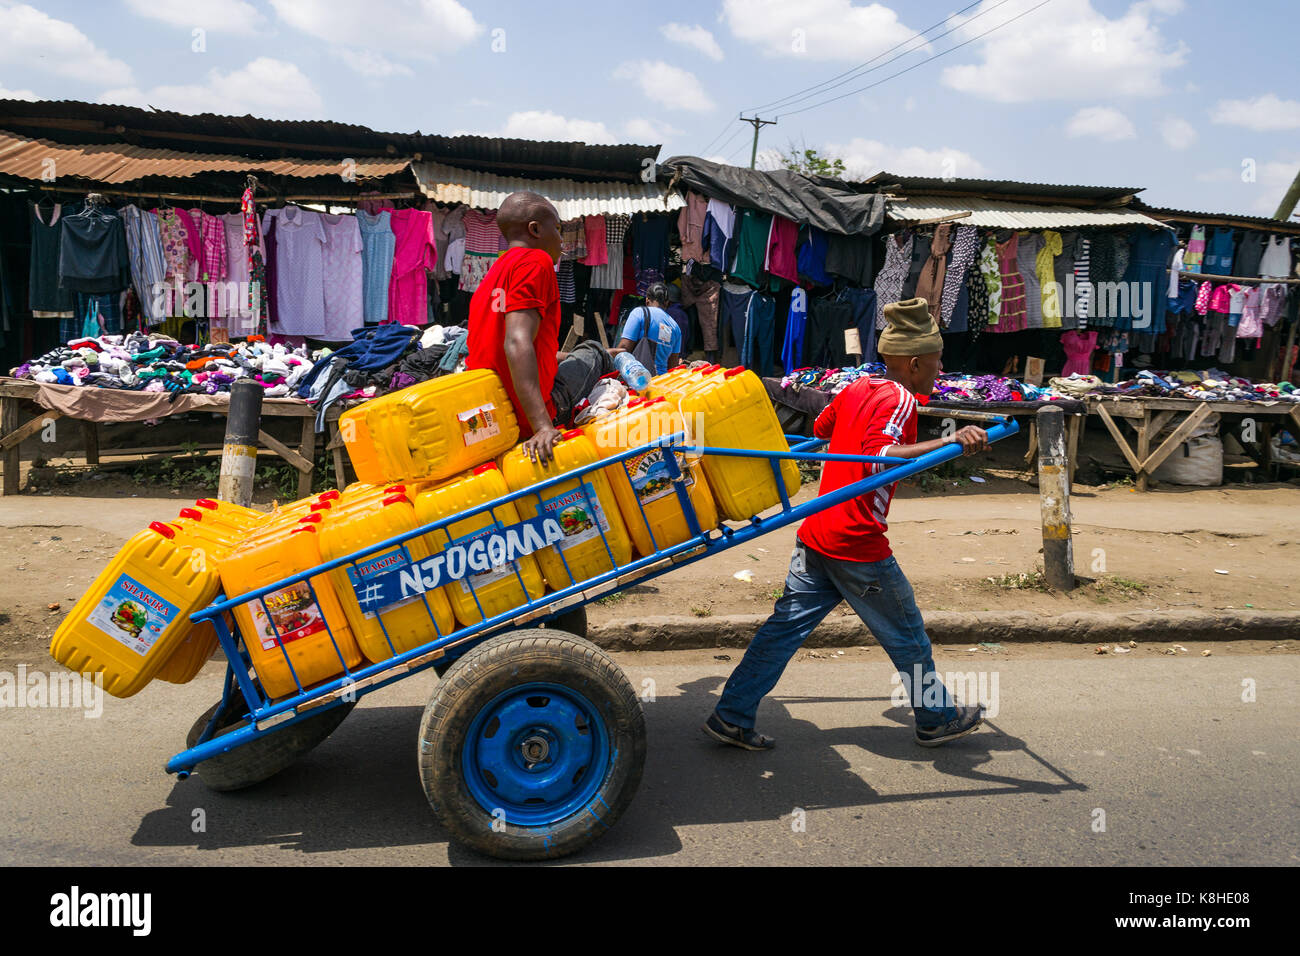 Two men pull a handcart with fresh water containers on road with people and clothes stalls on pavement in background, Nairobi, Kenya Stock Photo